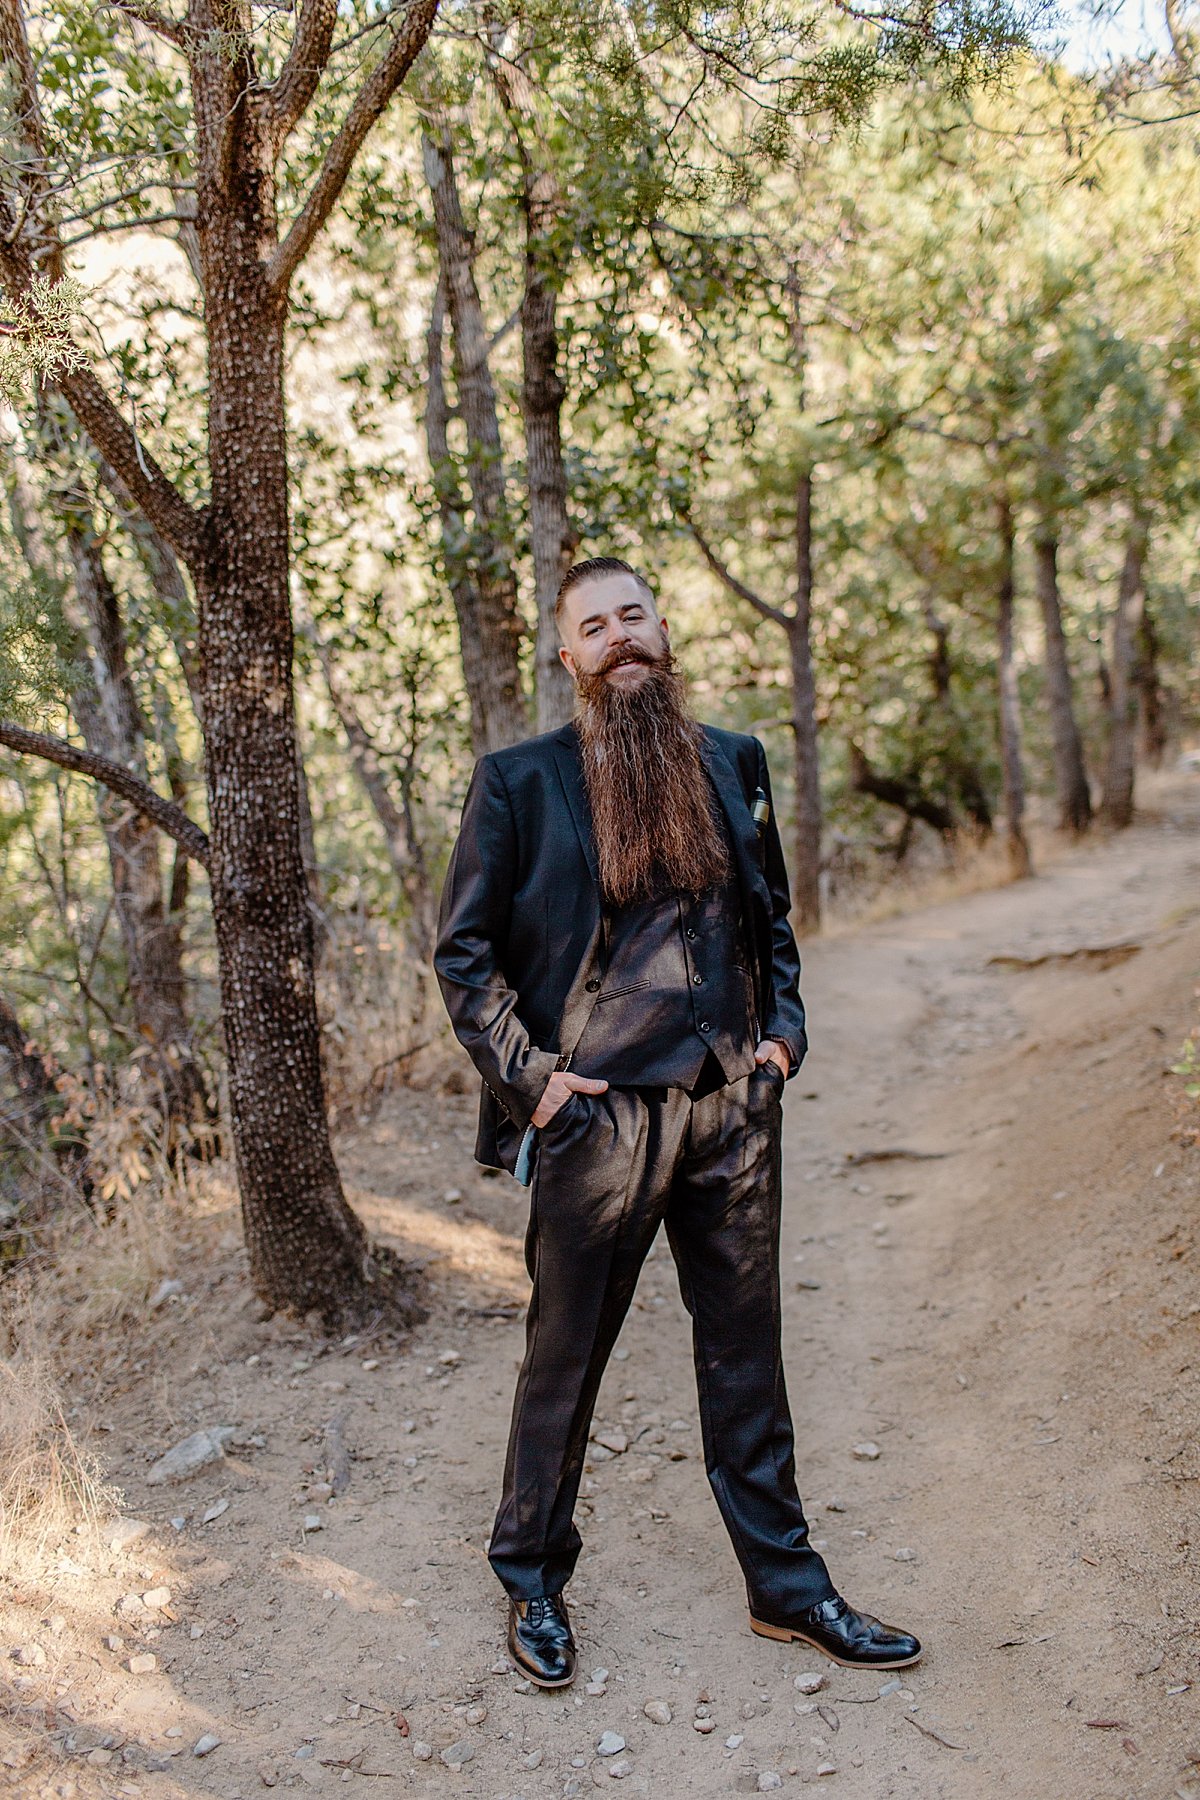  grooms portrait wearing a navy blue suit and a long red beard  